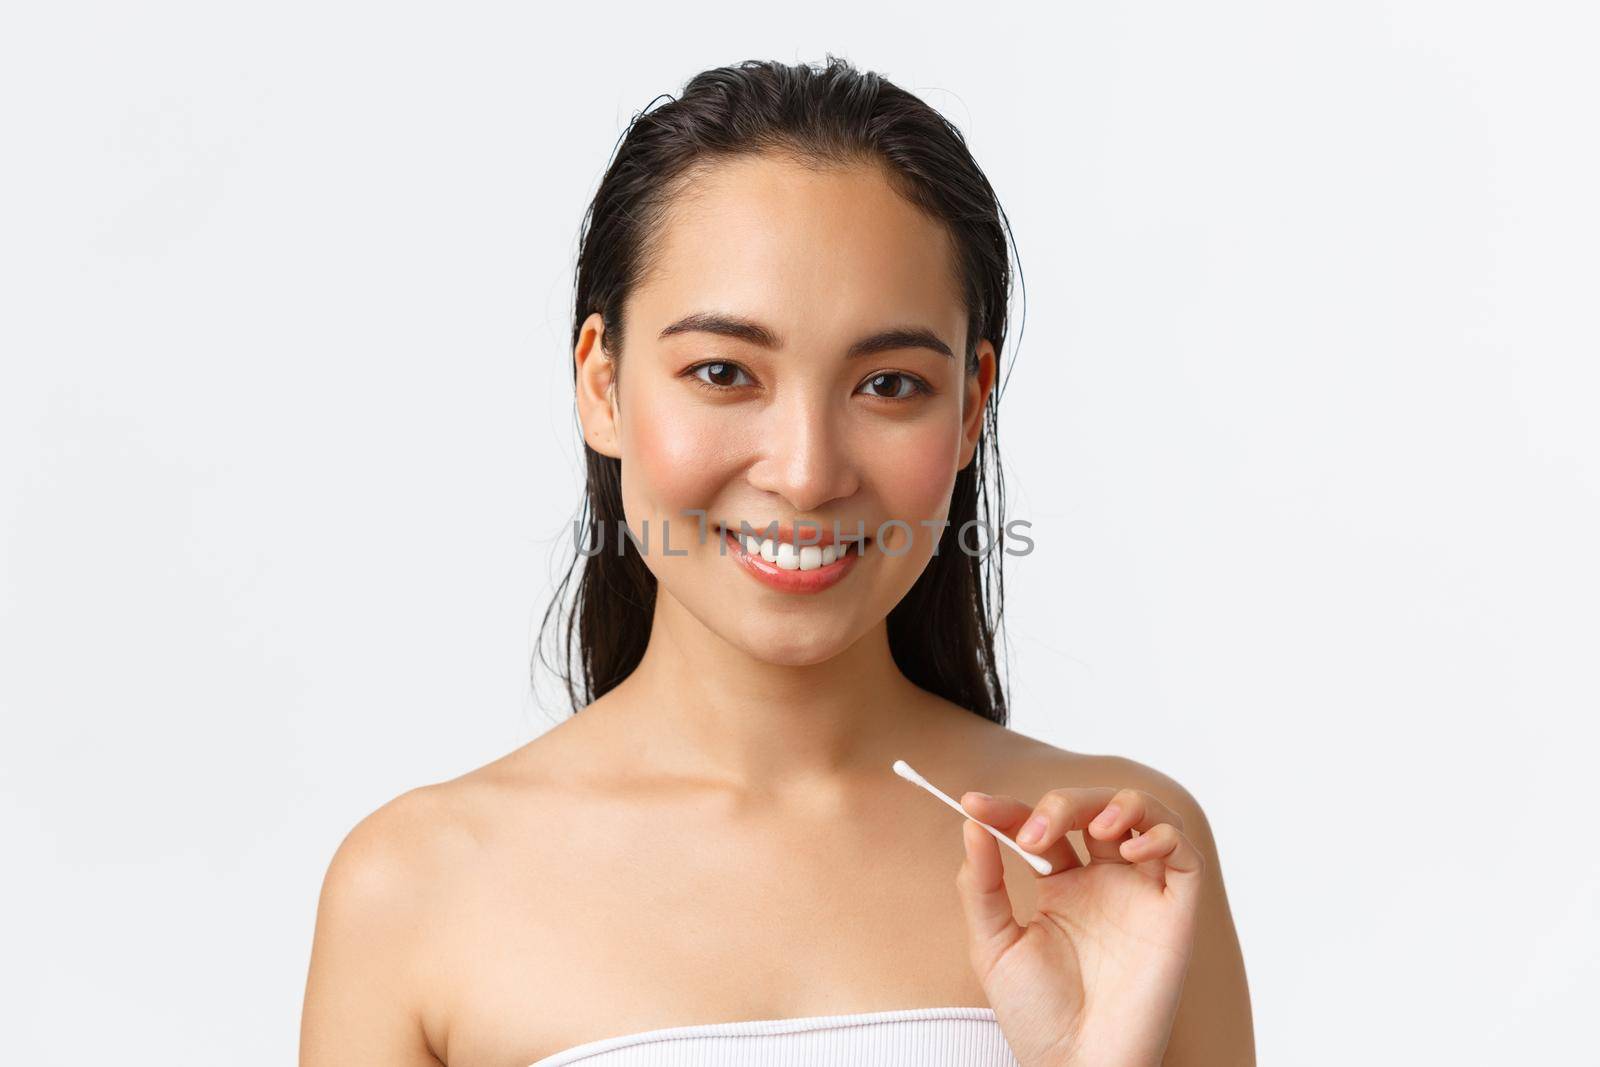 Skincare, women beauty, hygiene and personal care concept. Close-up of beautiful asian girl standing naked in bathroom or shower, holding cotton buds, swabs for ears, standing white background.